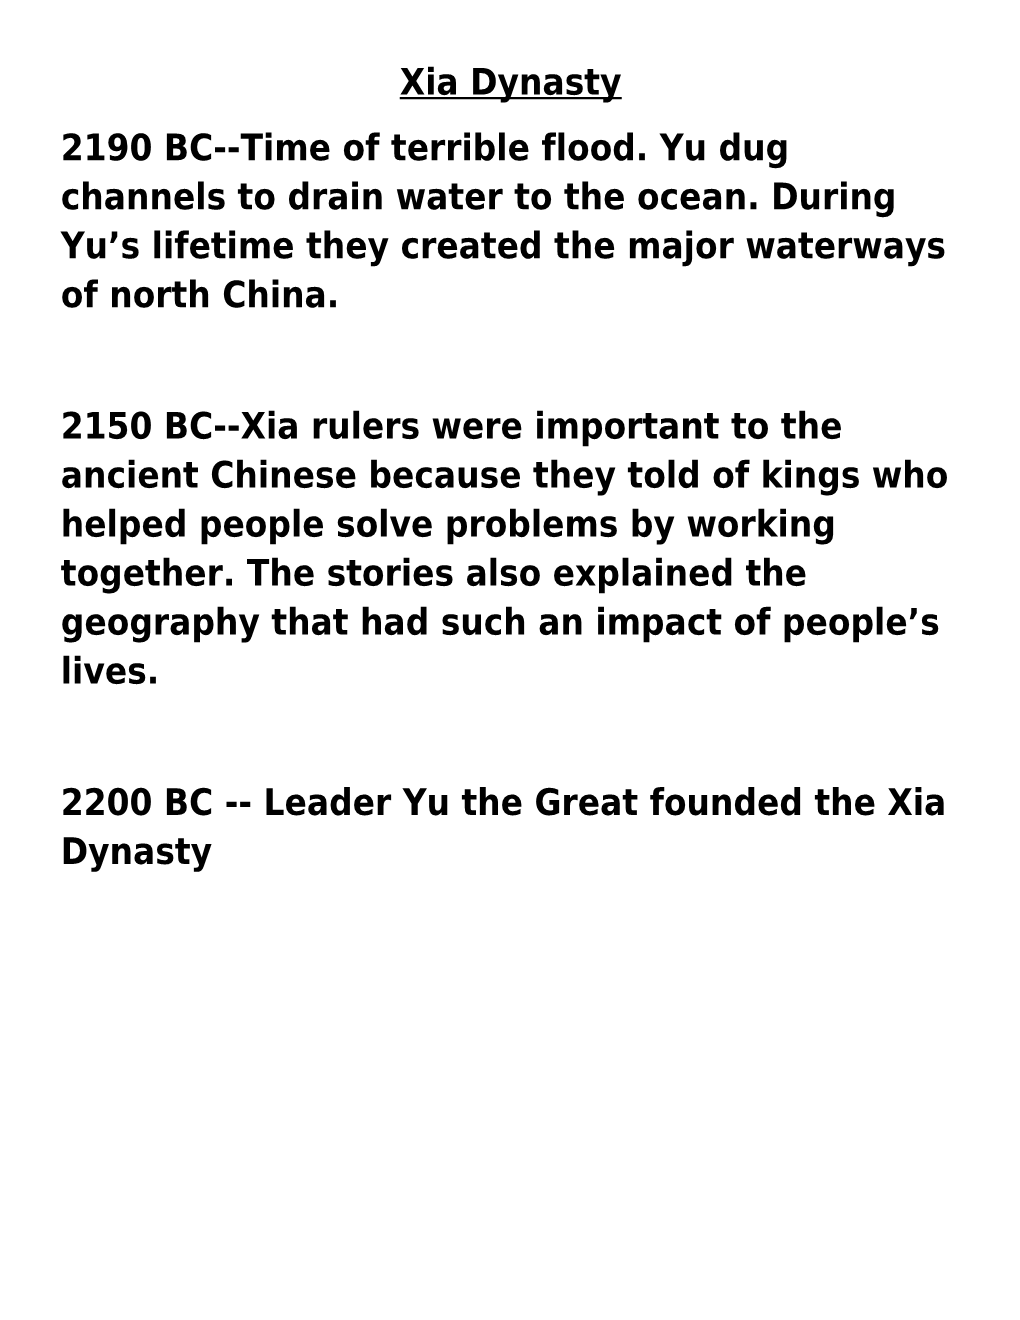 2200 BC Leader Yu the Great Founded the Xia Dynasty